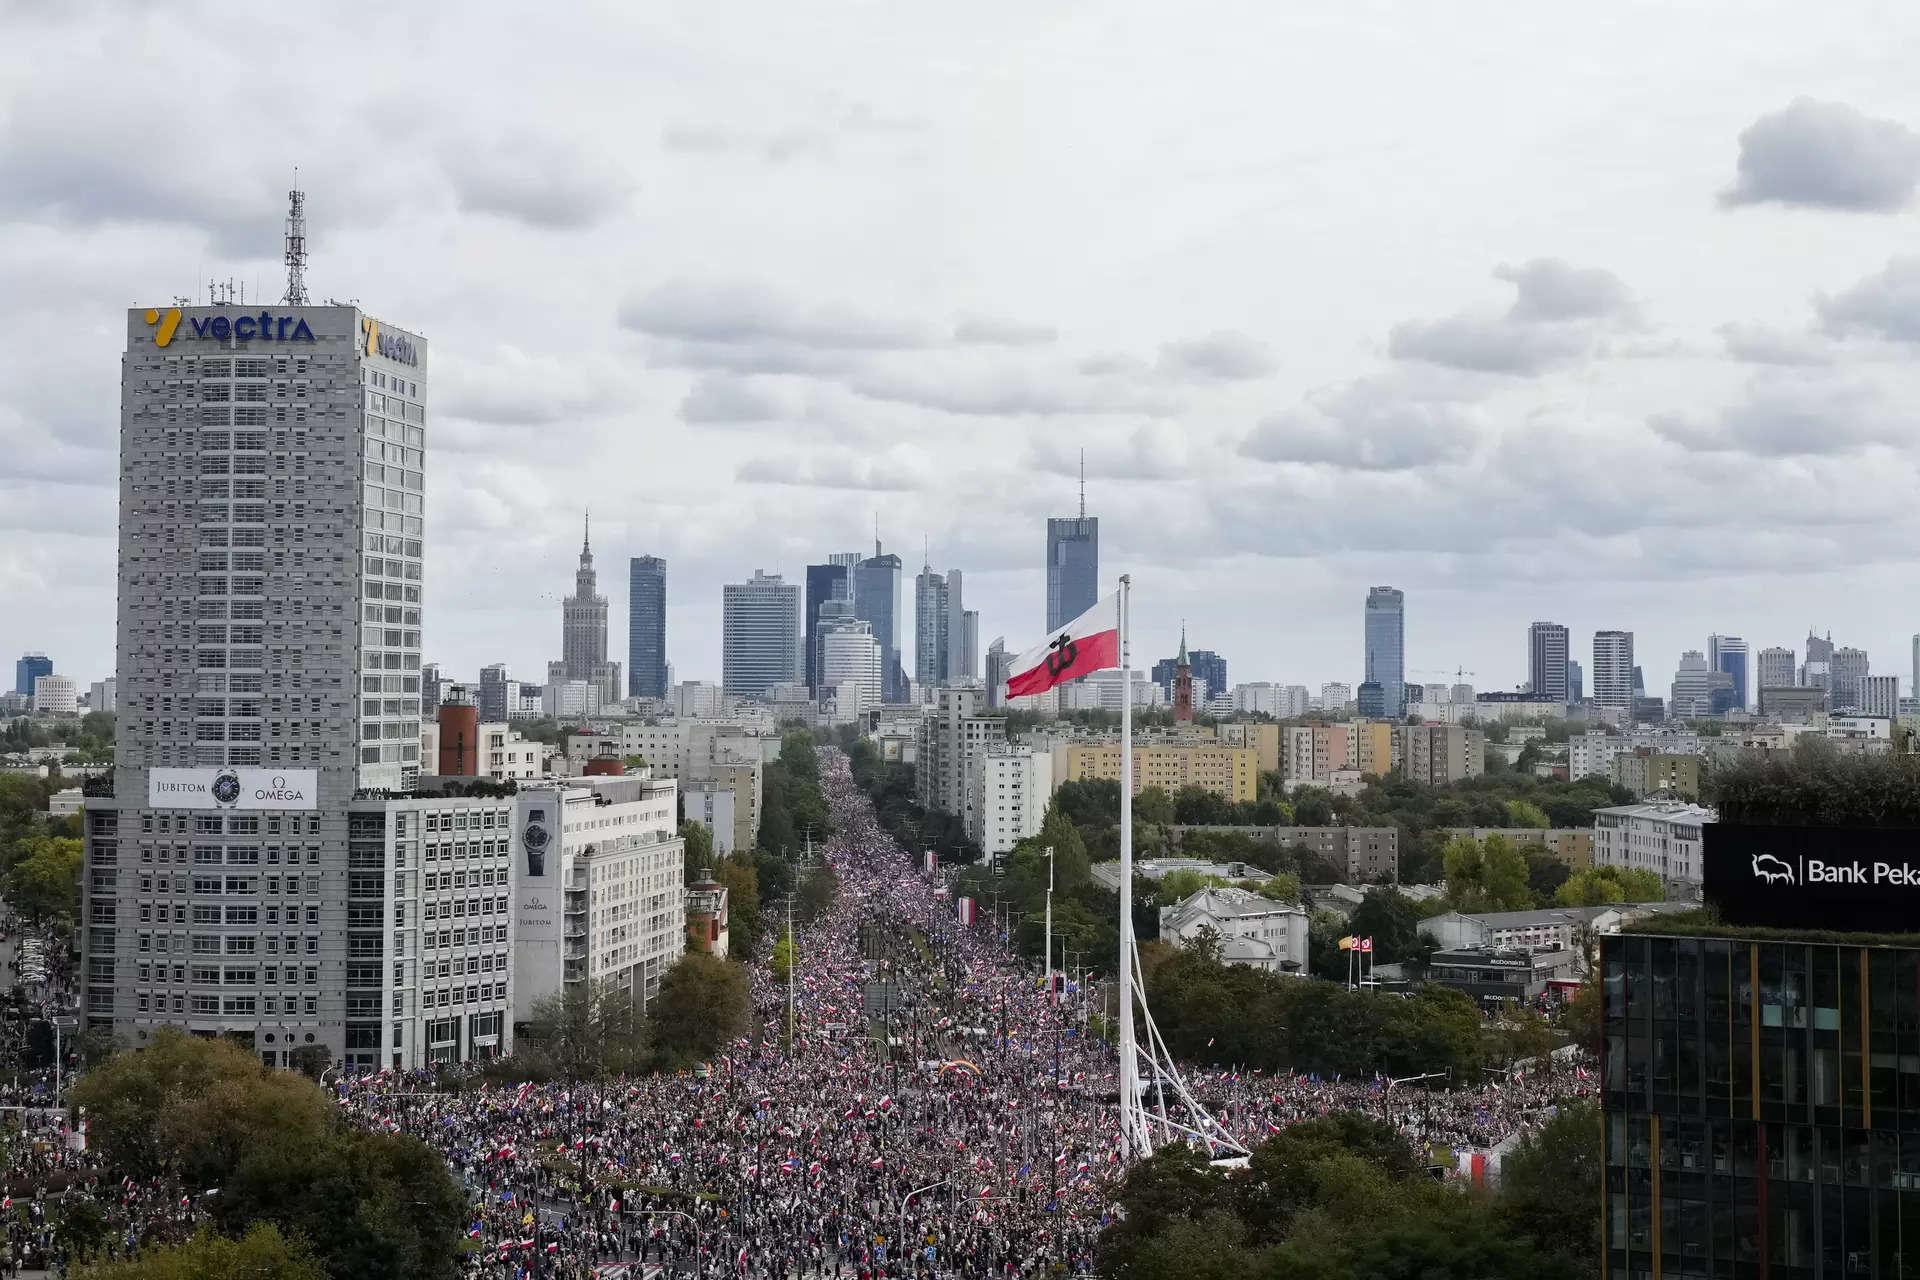 <p>Thousands of people gather for a march to support the opposition against the governing populist Law and Justice party in Warsaw, Poland, Sunday, Oct. 1, 2023. Polish opposition leader Donald Tusk seeks to boost his election chances for the parliament elections on Oct. 15, 2023, leading the rally in the Polish capital. (AP Photo/Czarek Sokolowski)</p>